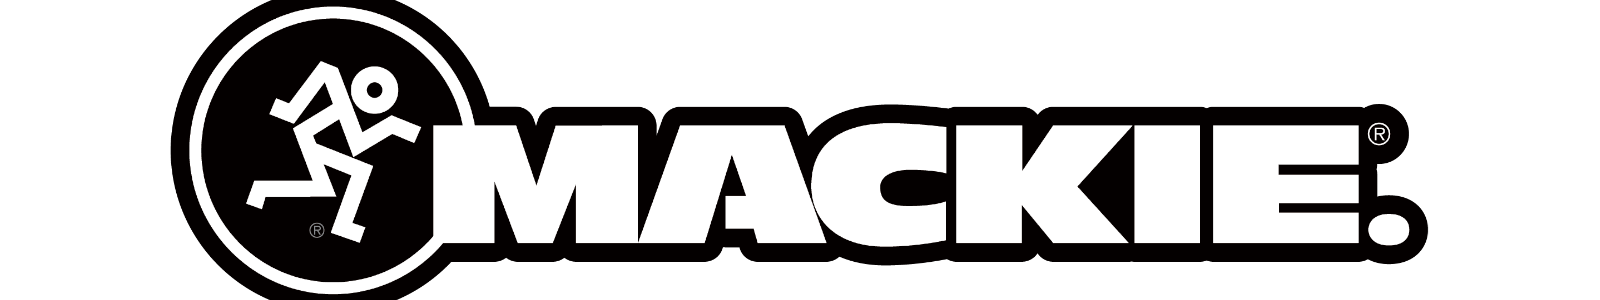 Mackie - Loud Audio - Business sponsor of The DJ Sessions